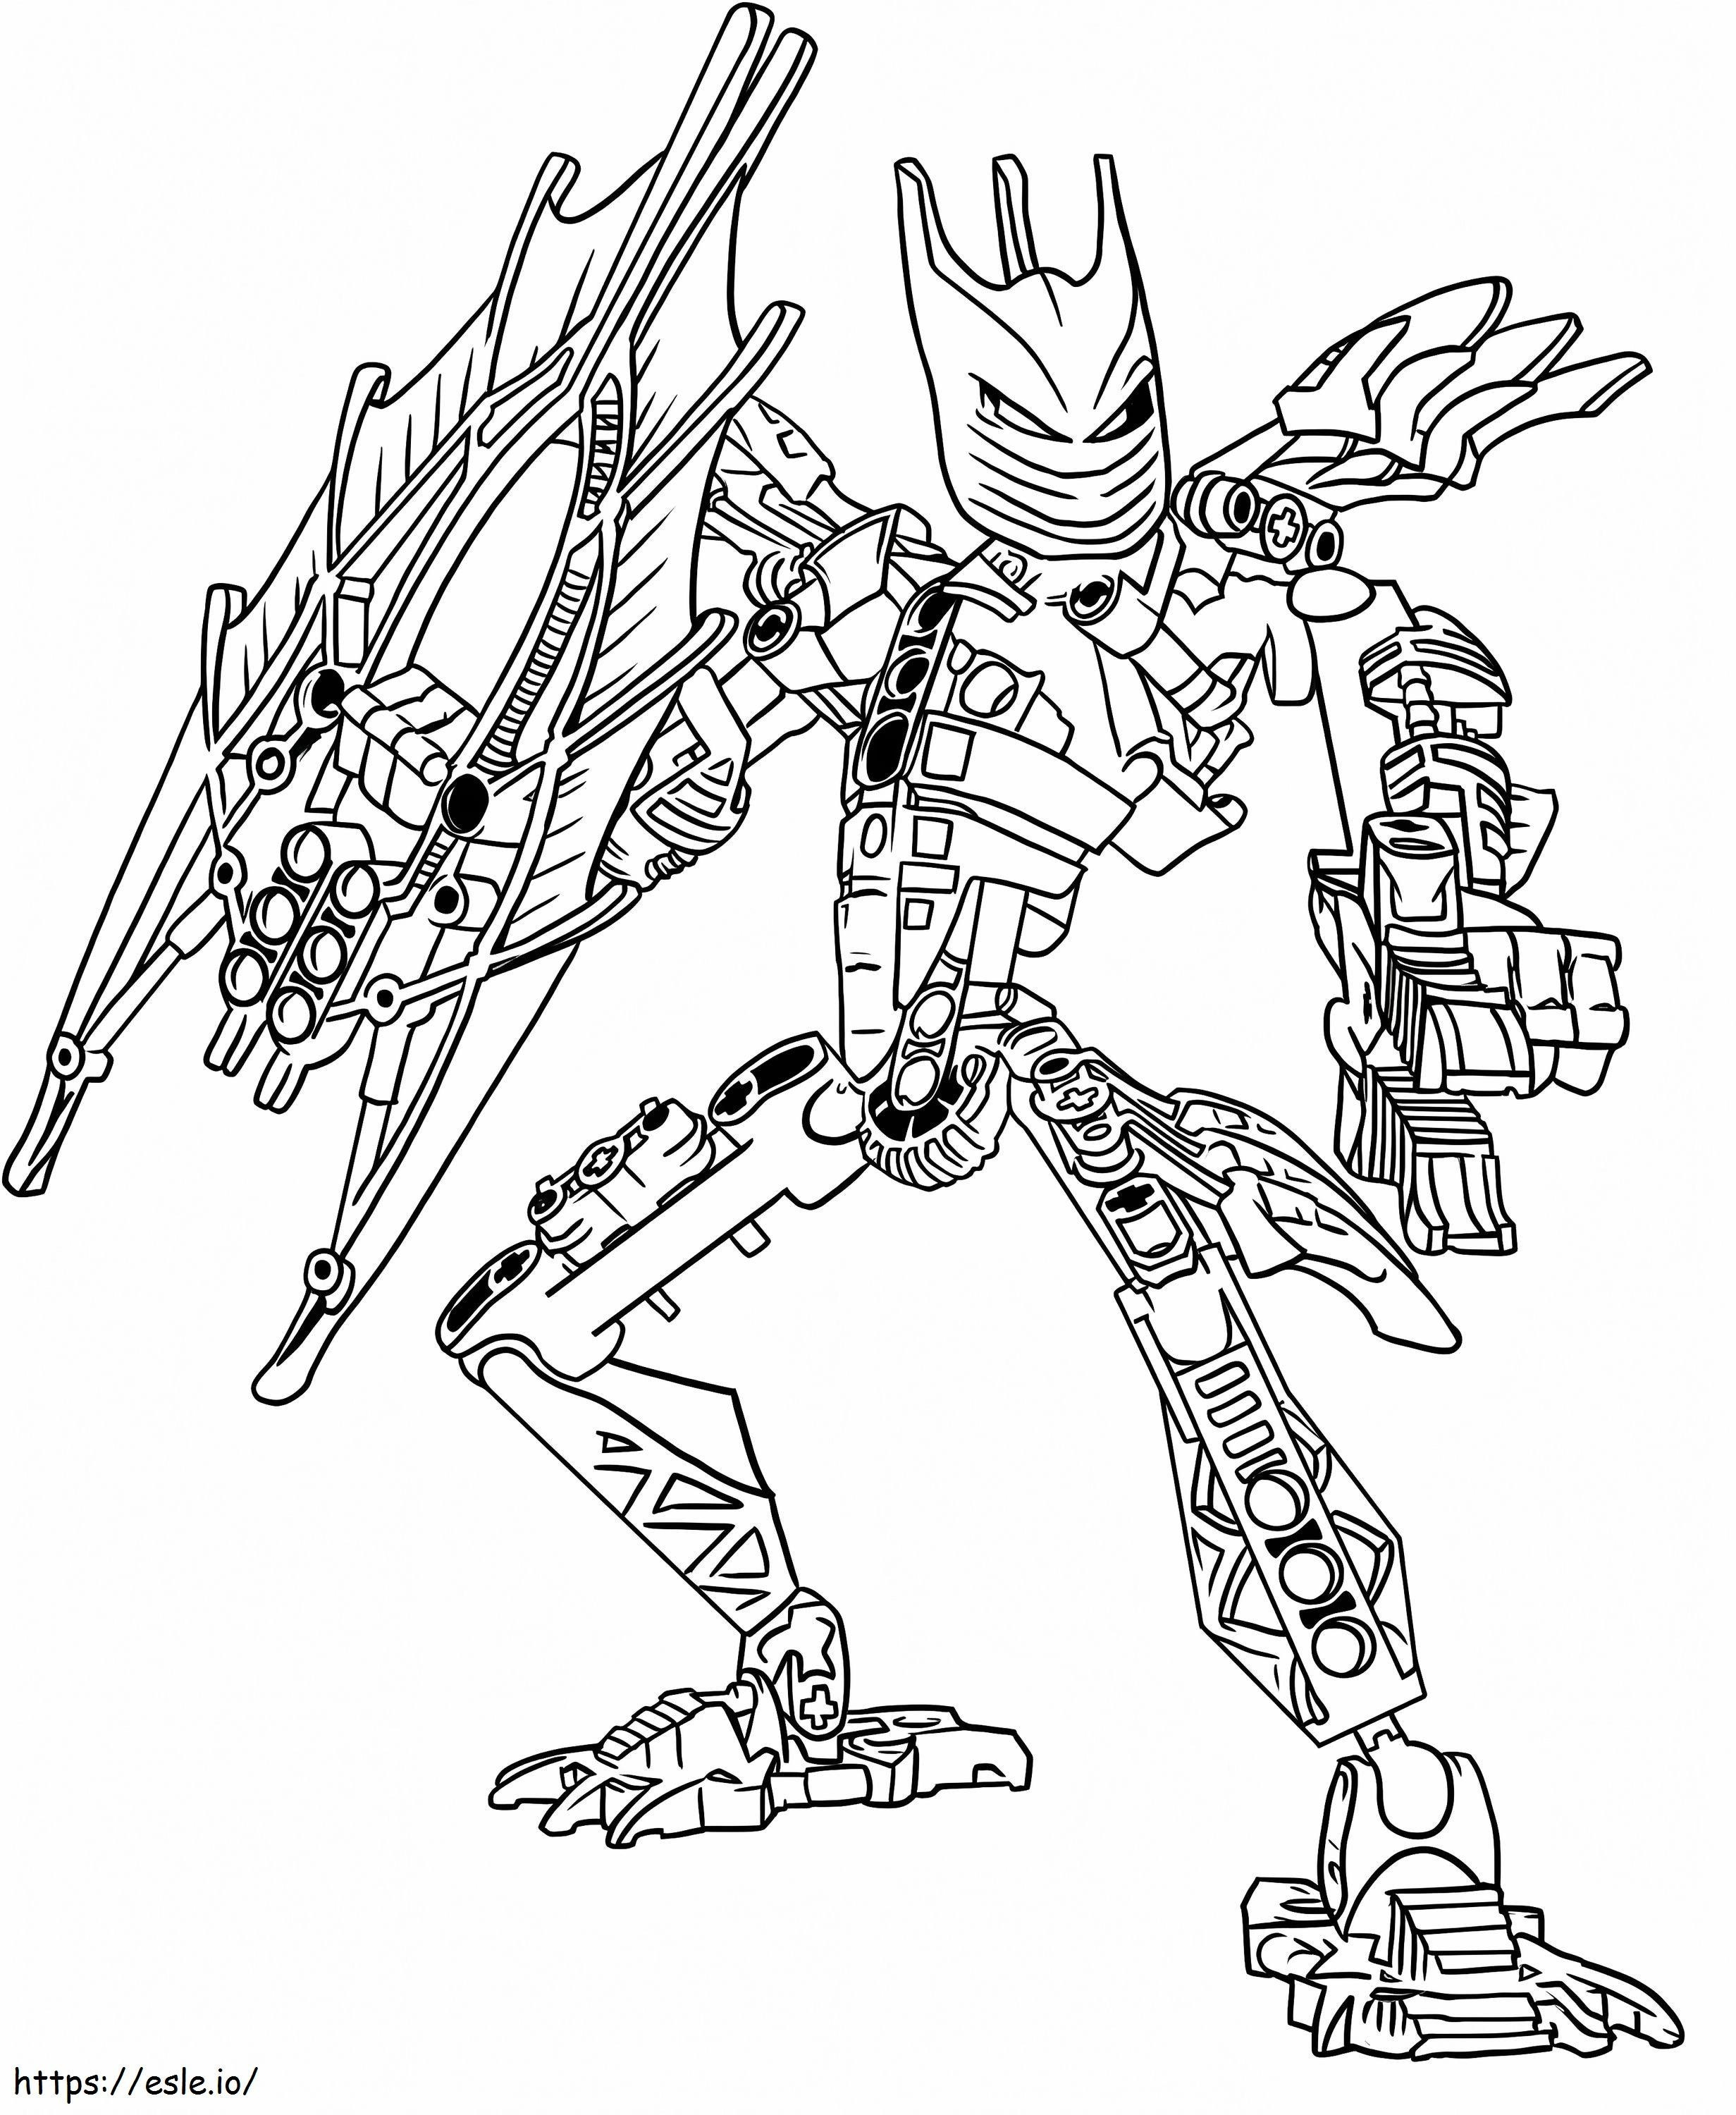 Awesome Bionicle coloring page